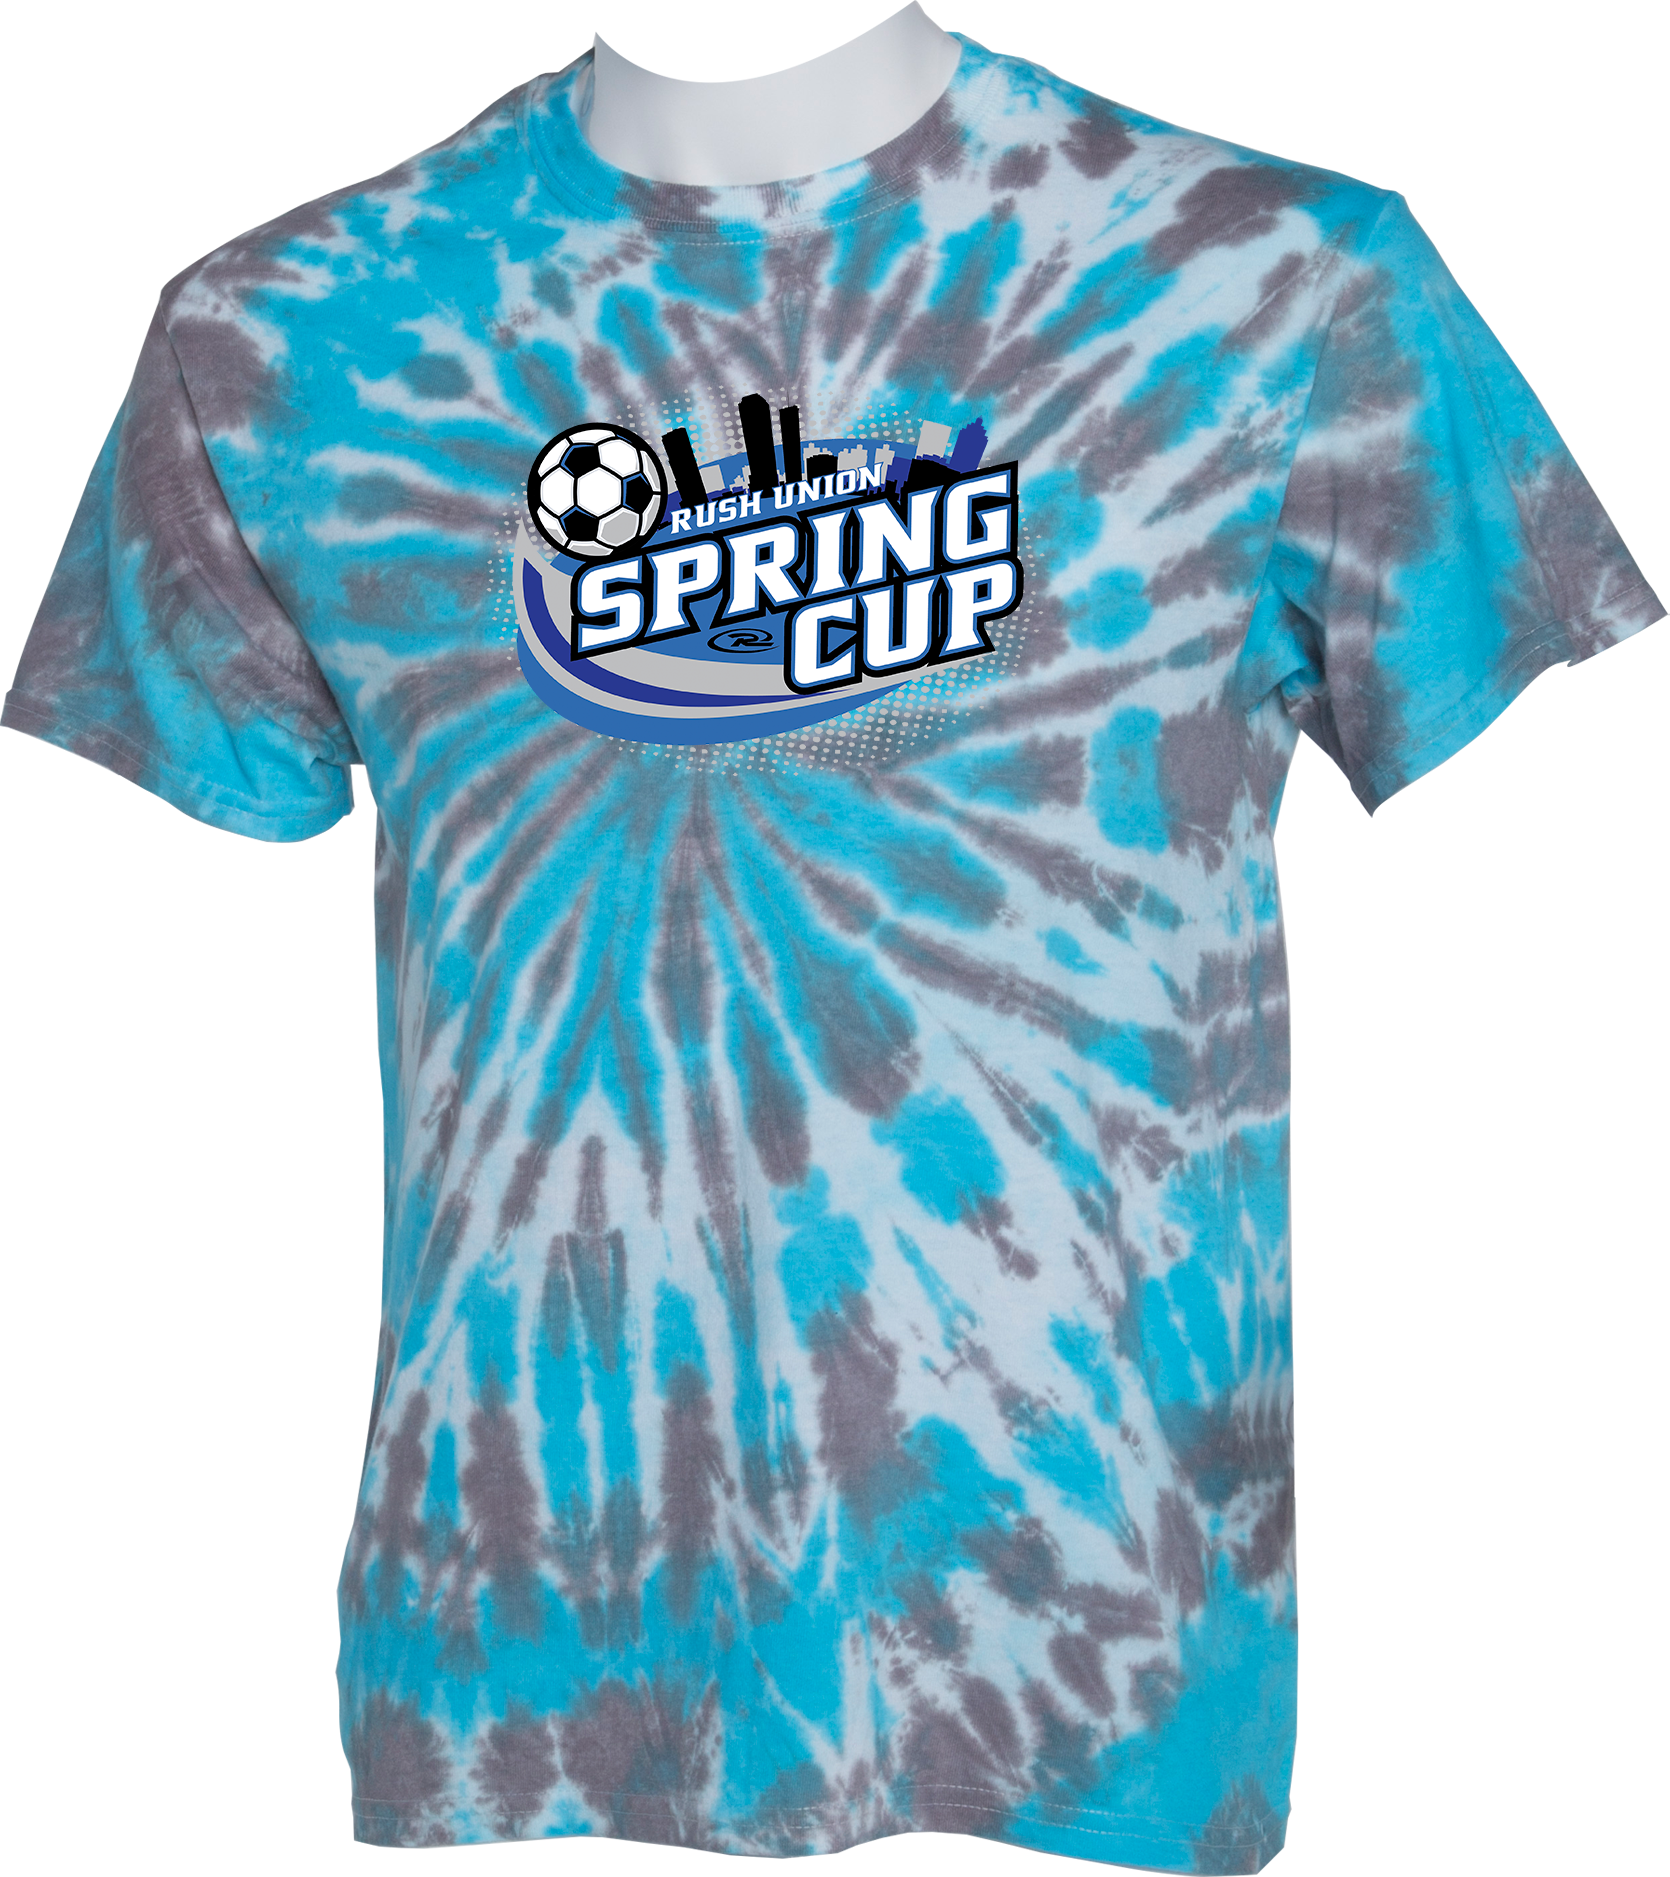 TIE-DYE SHORT SLEEVES - 2023 Rush Union Spring Cup